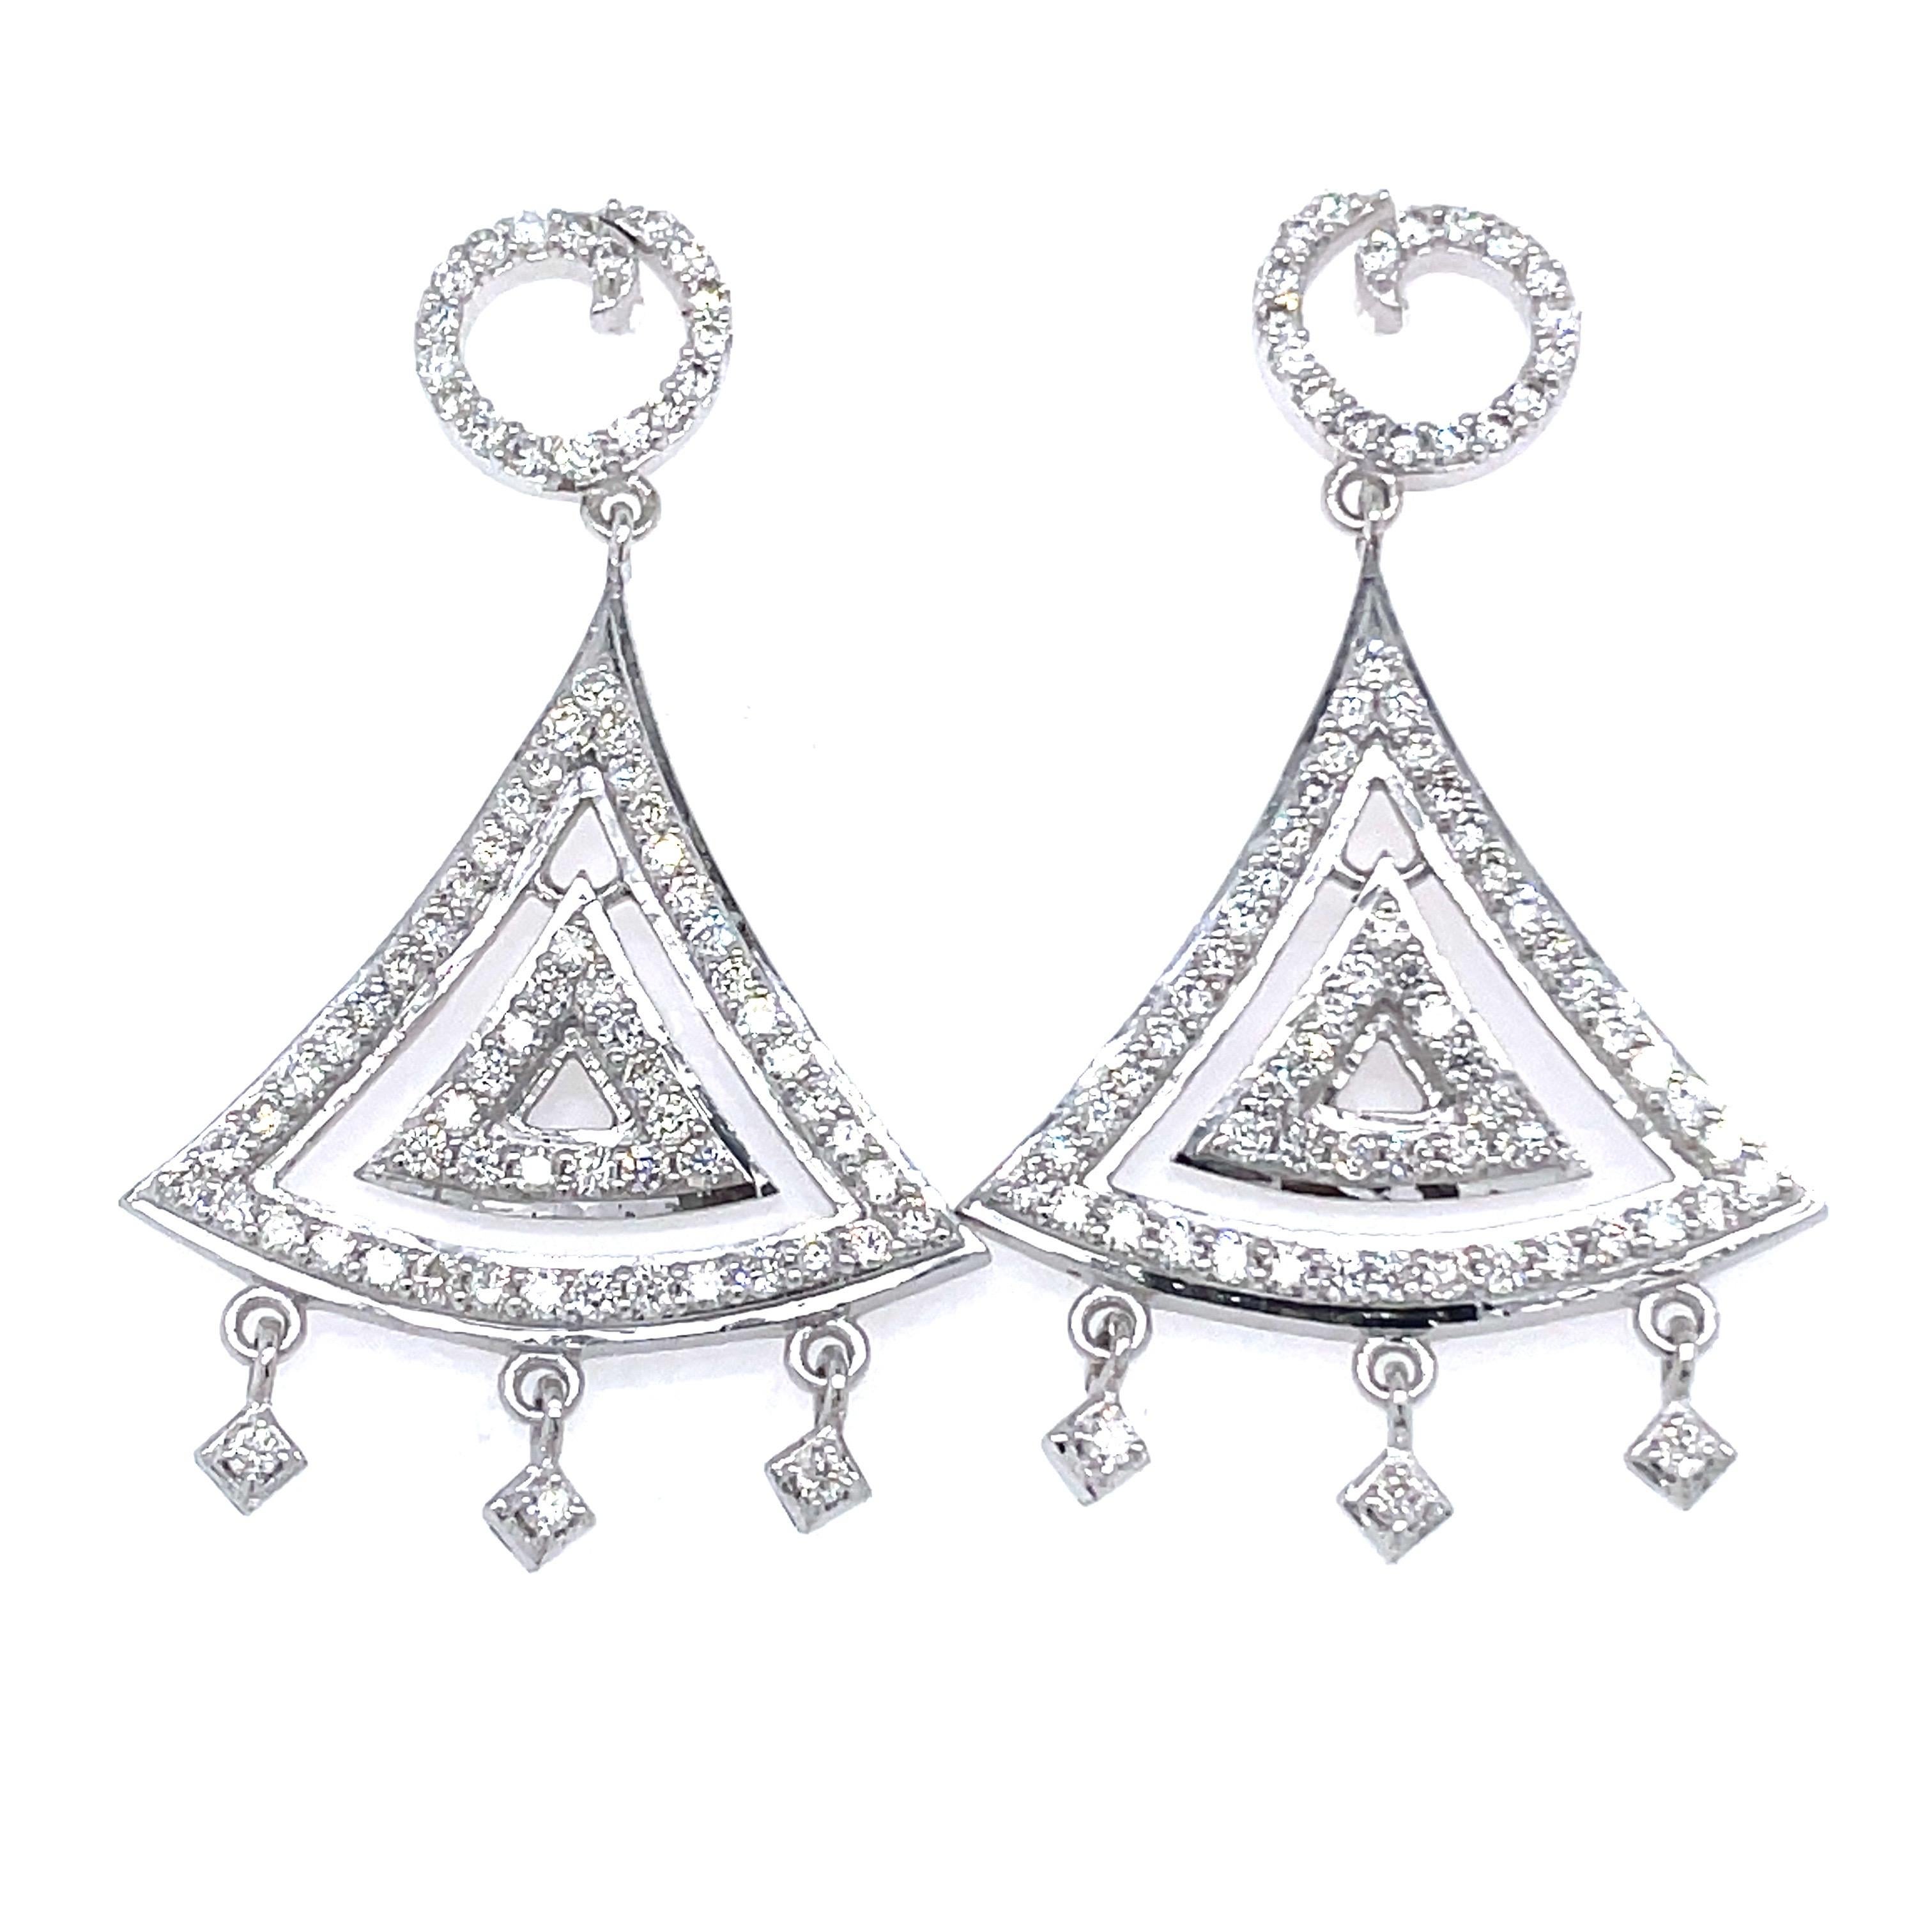 14k White Gold Triangle Shaped Chandelier Earrings

Prepare to defy convention and flaunt your unique style with these 14k White Gold Triangle Chandelier Earrings – where geometry meets glamour!

With 2.23 carats of gleaming diamonds and 11.23 grams